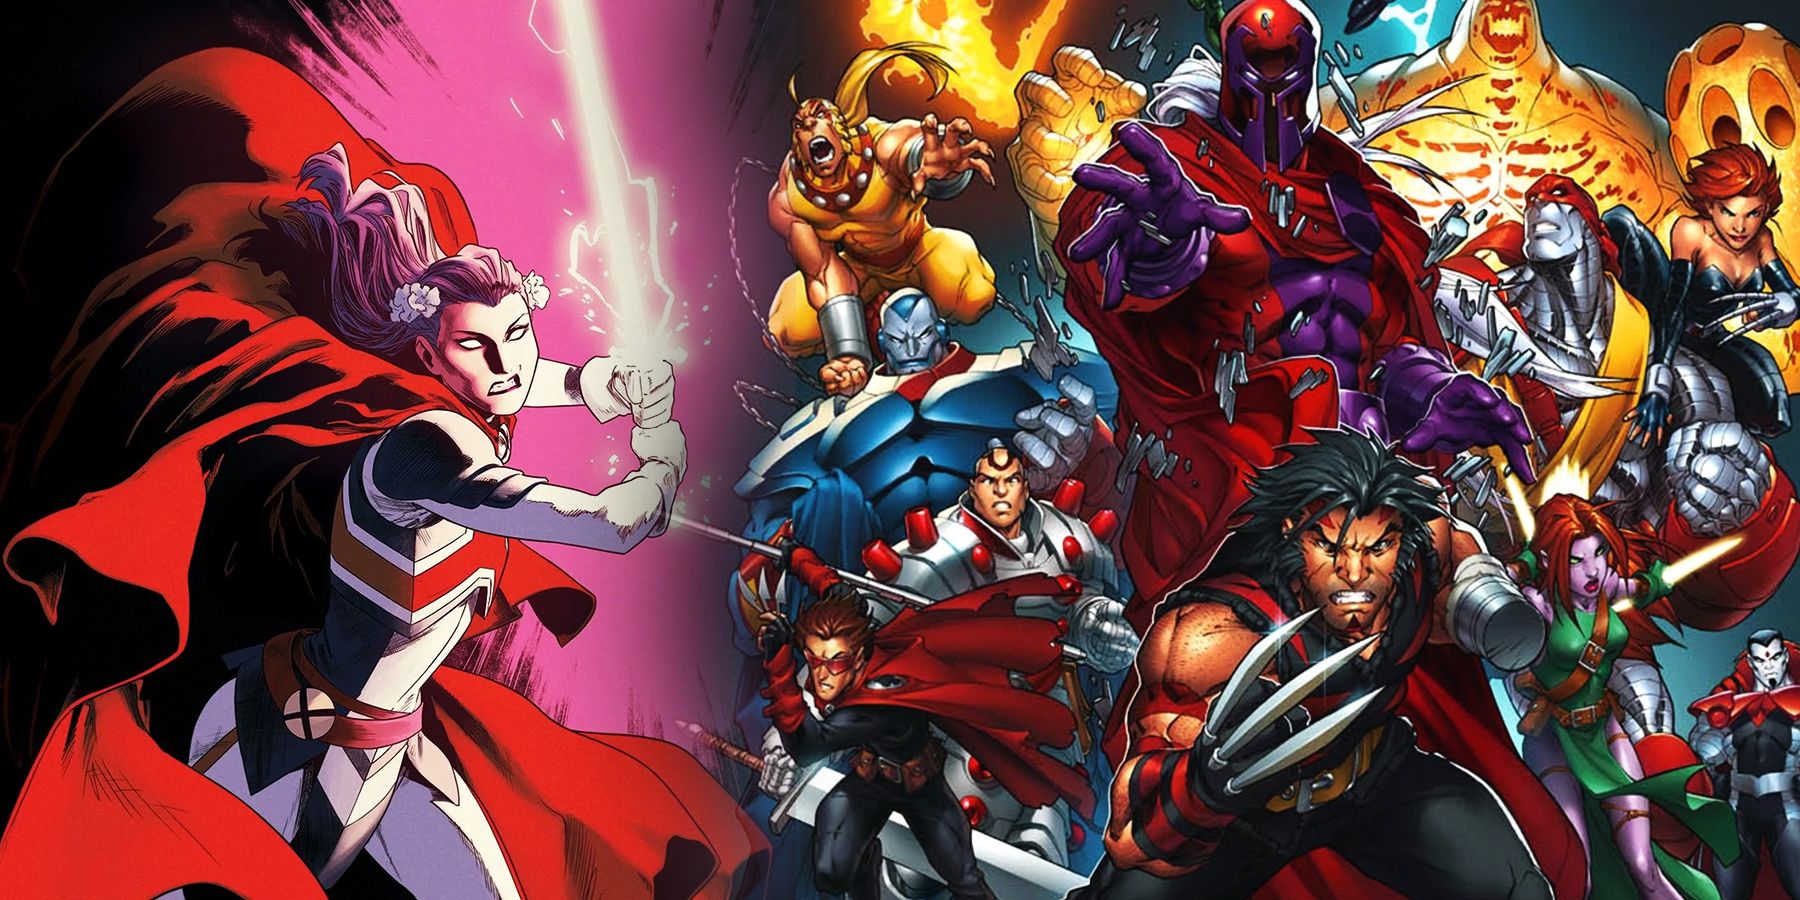 On the left, Psylocke draws back her sword, ready to swing. On the right, Wolverine leads a team of mutants on the charge from 'Age of Apocalypse'.